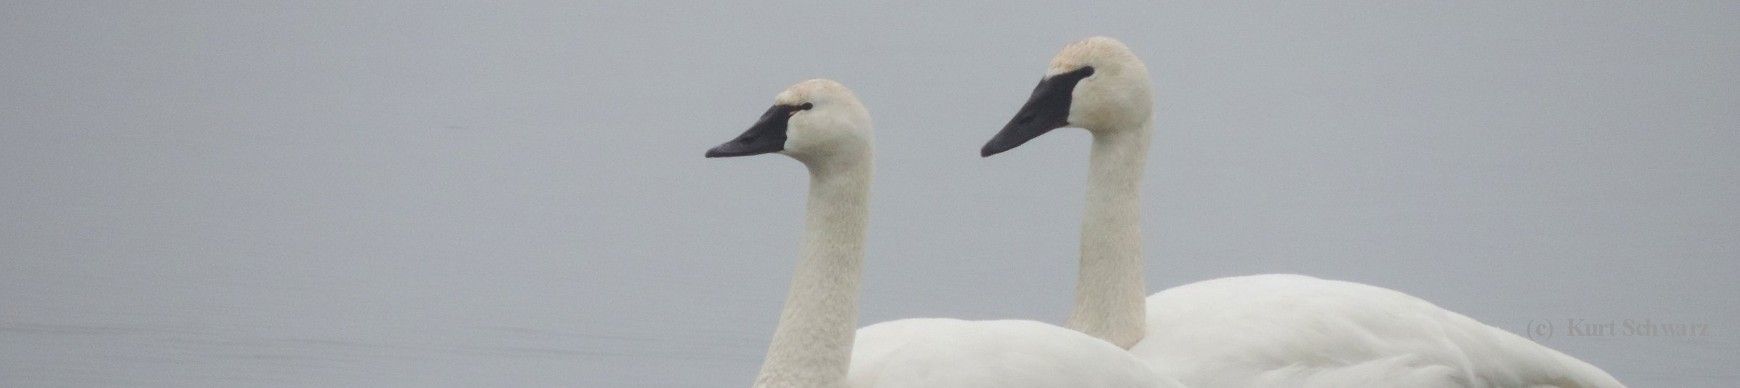 Head and bill shapes can help identify swan species including Trumpeter Swans, Tundra Swans and Mute Swans